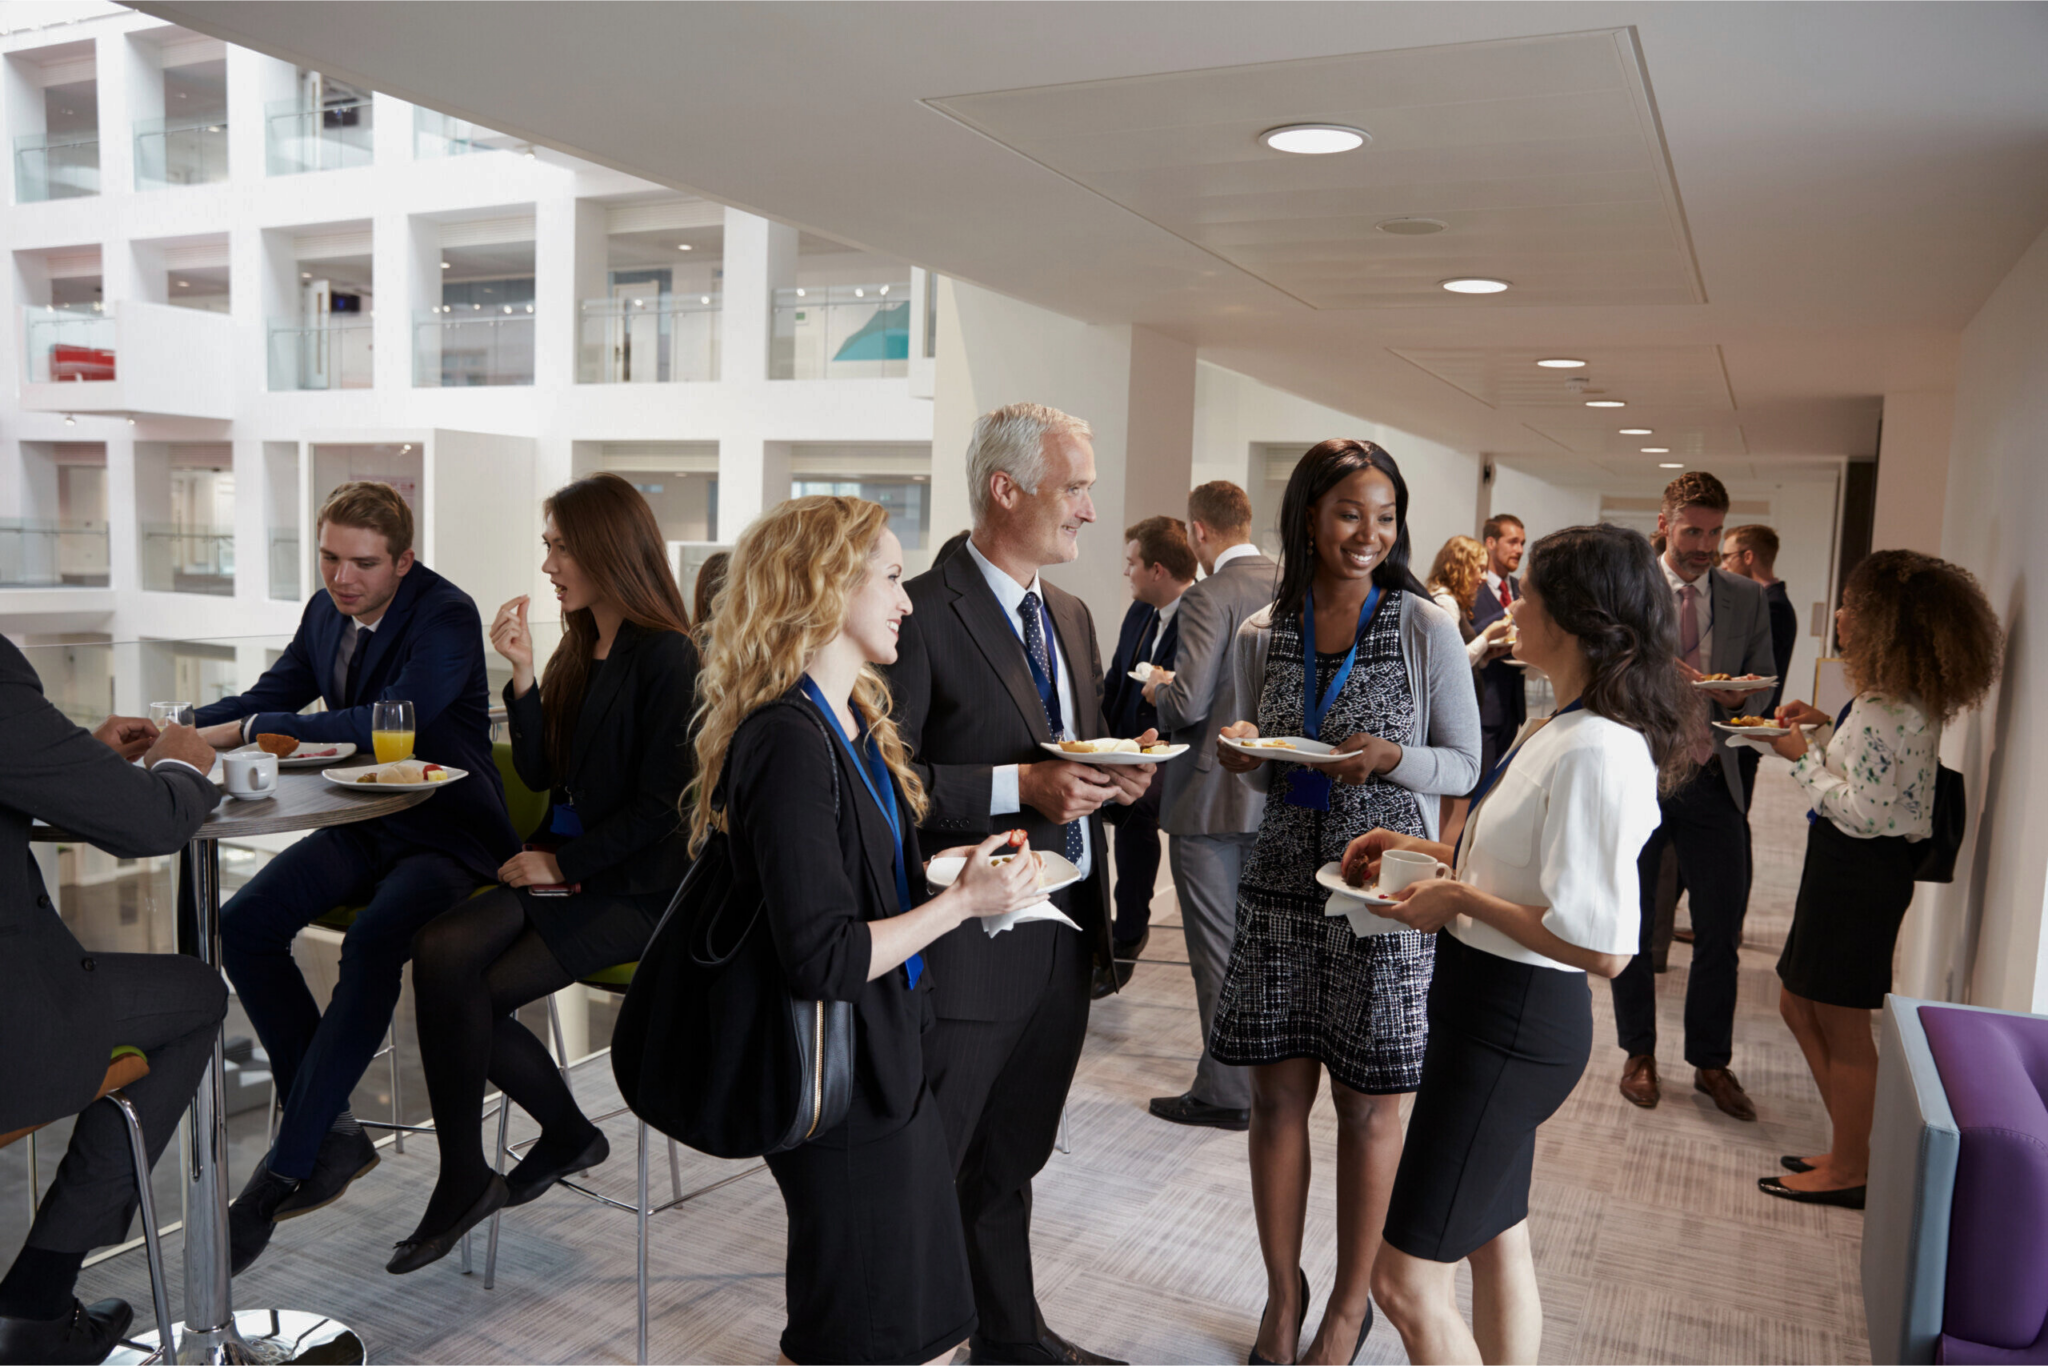 A group of conference attendees eat and talk at an event.